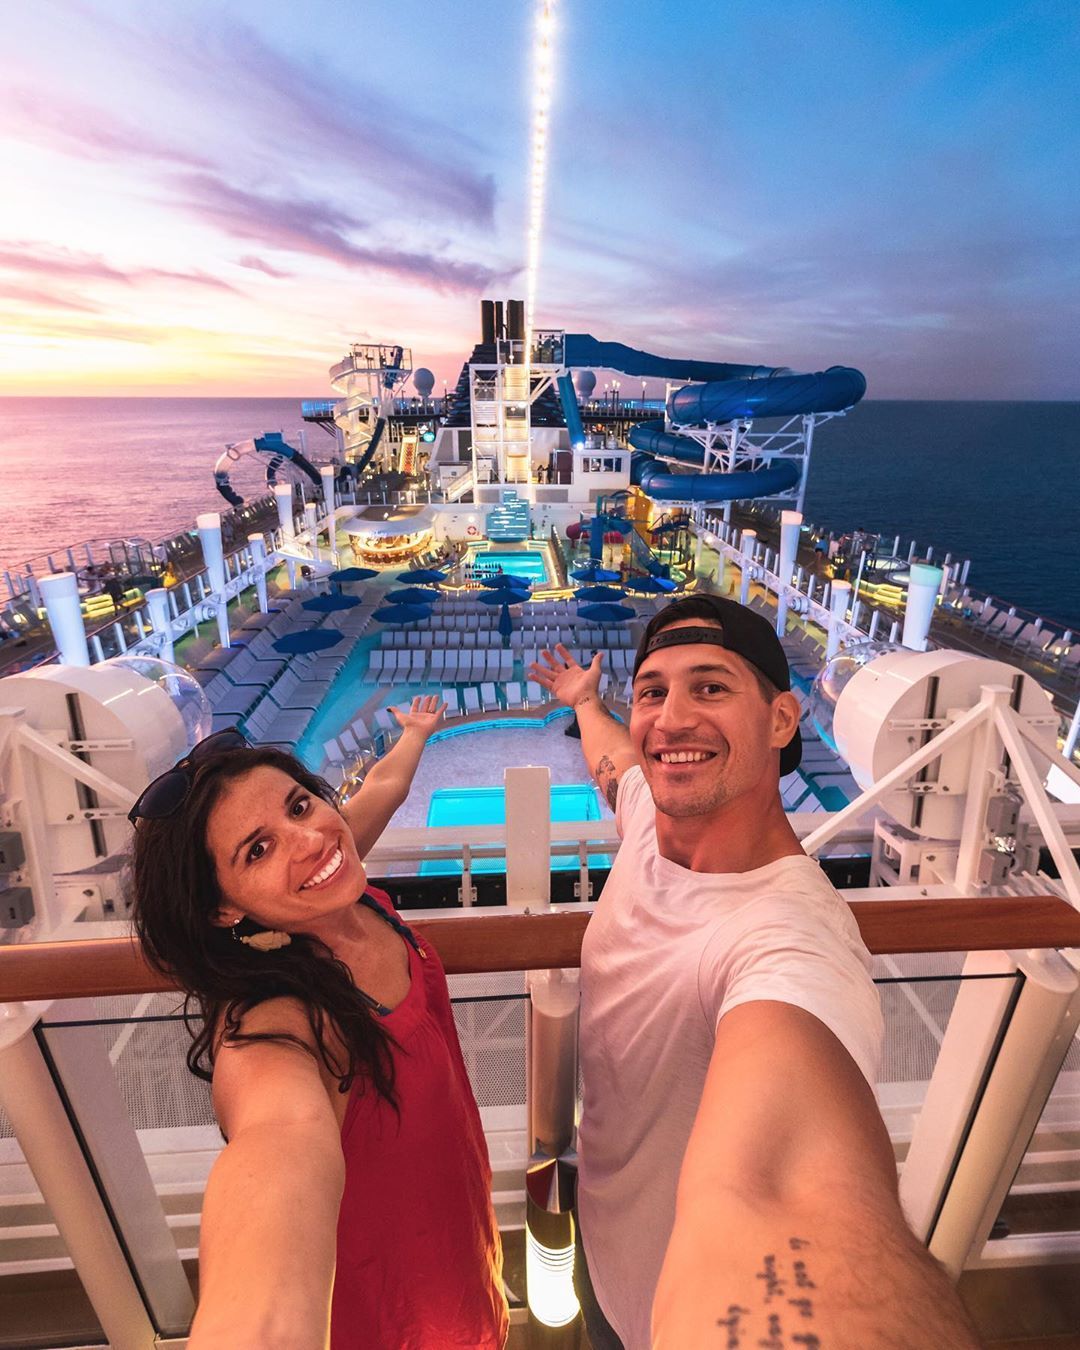 Two people having a great time on a cruise